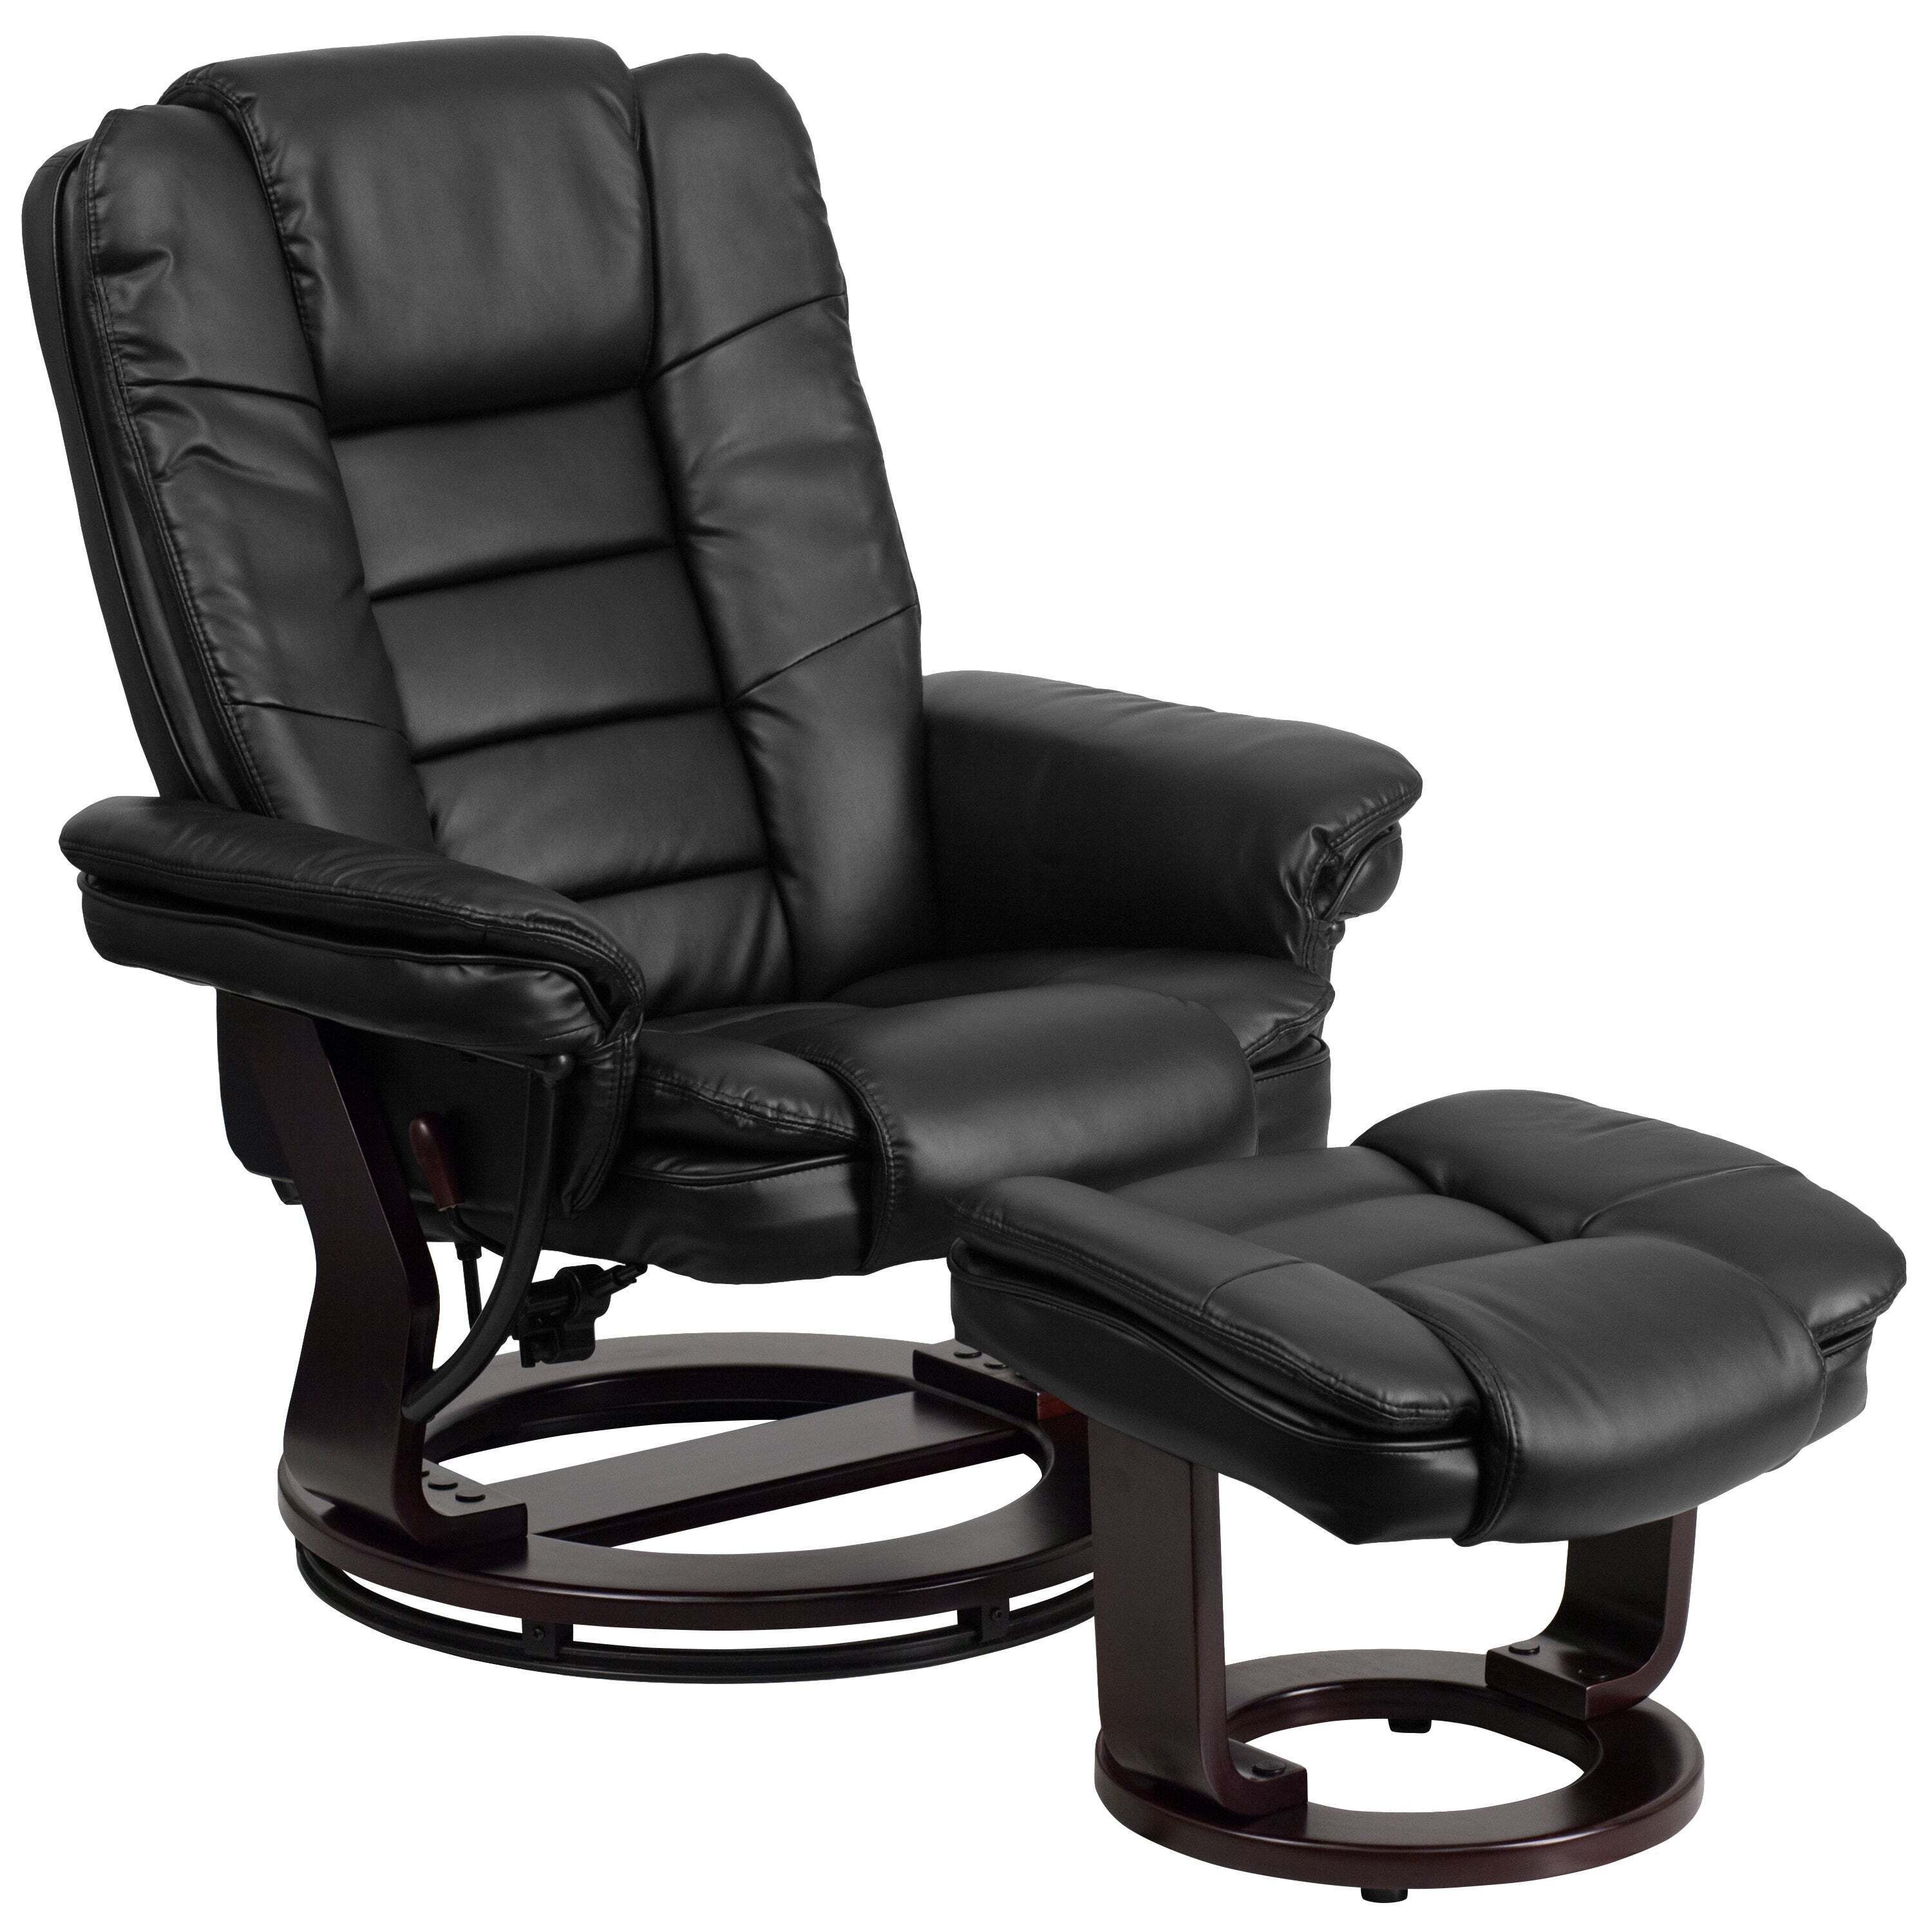 Classic Black Leather Recliner